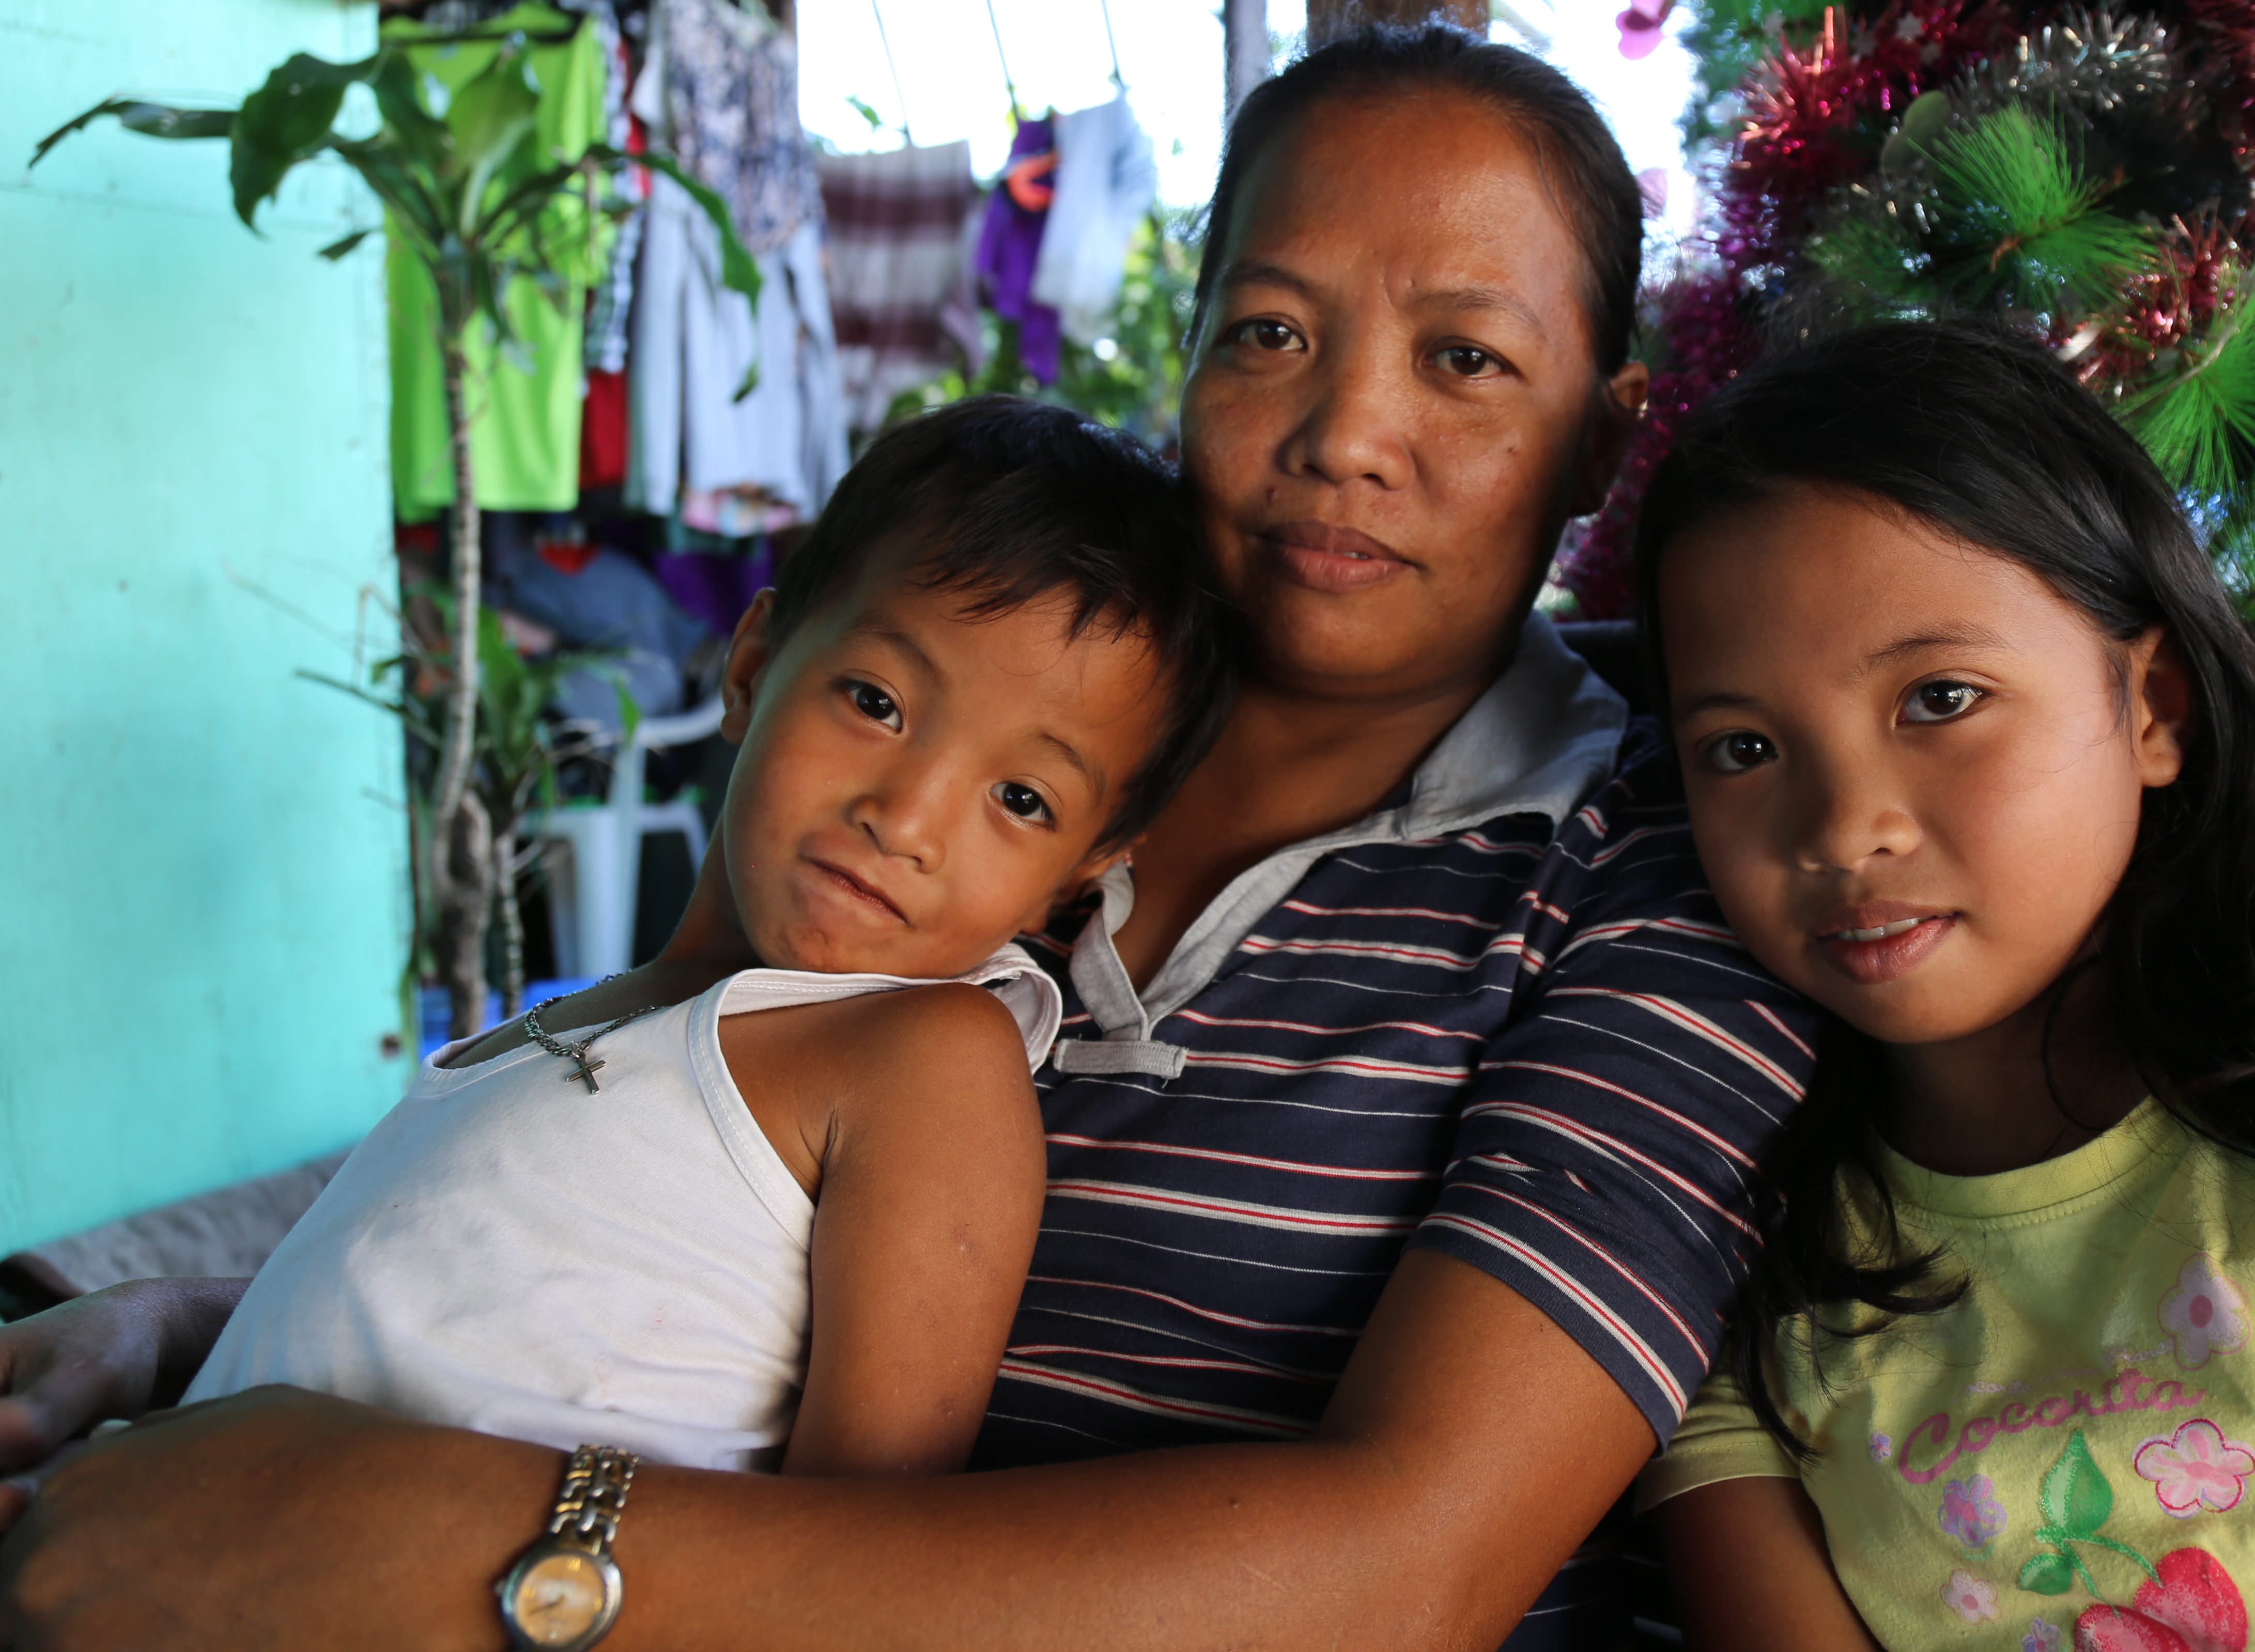 Sarah from the Philippines with her family